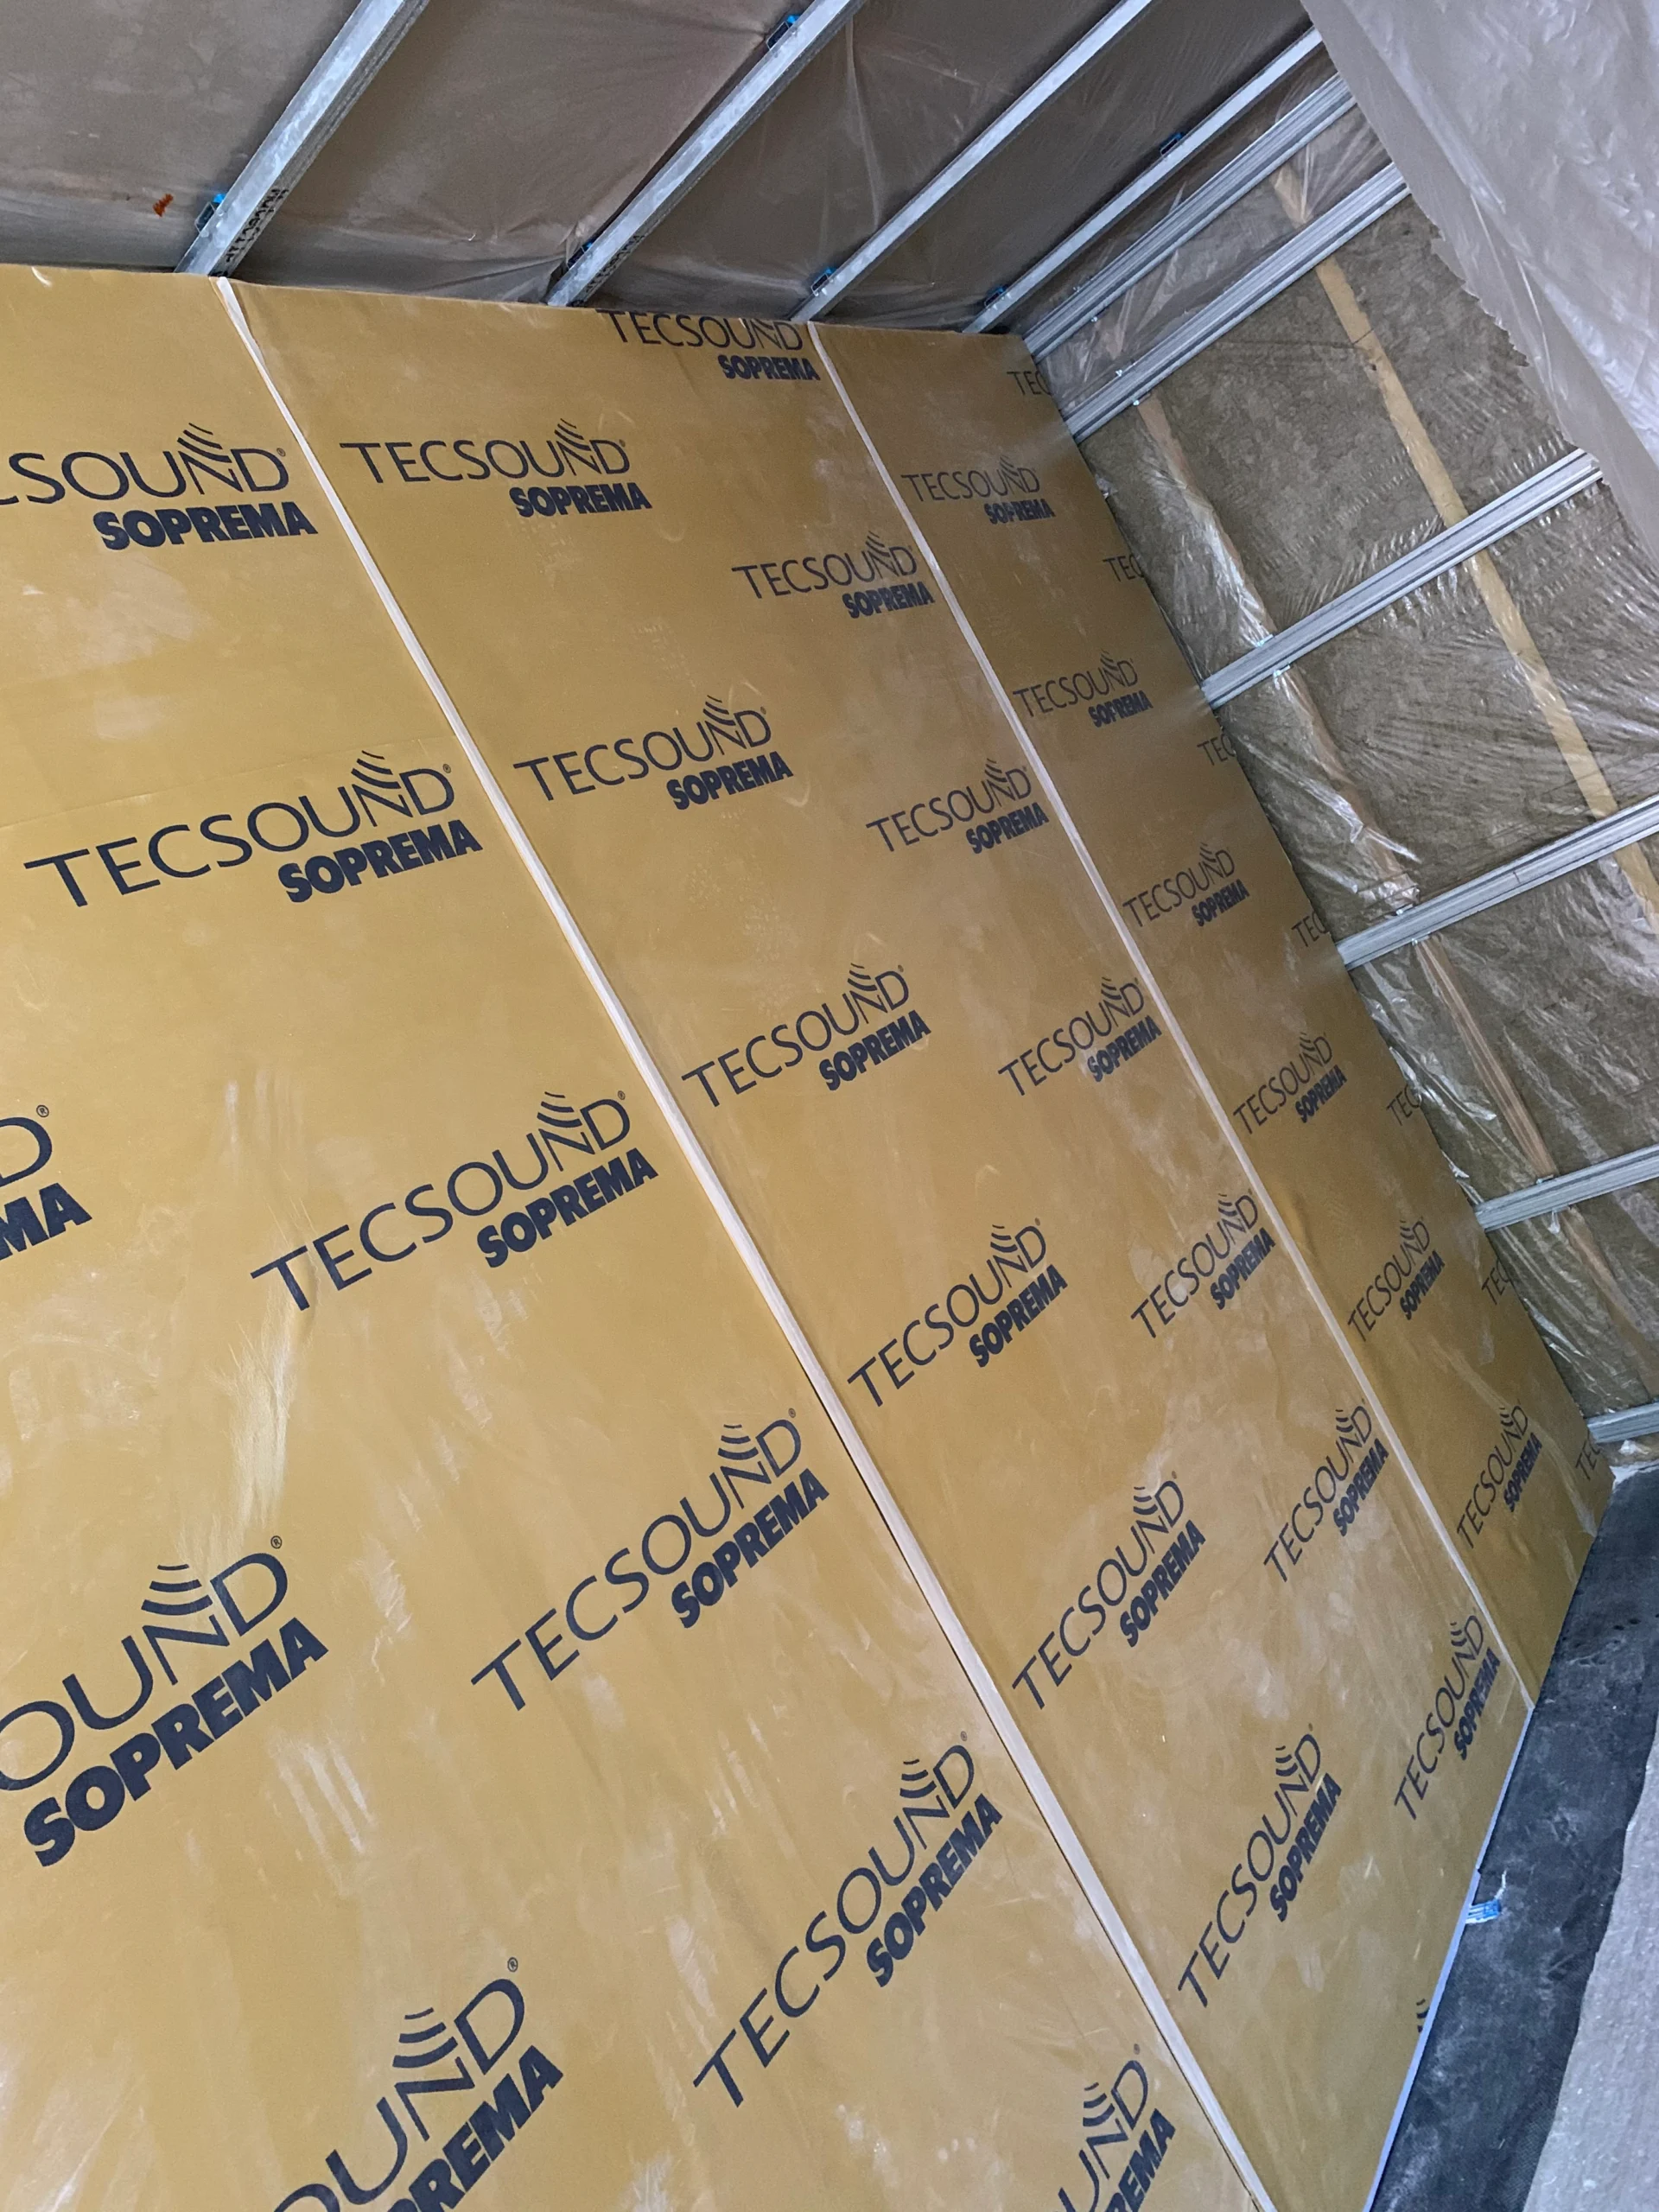 MuteClip Soundproofing channels and tecsound acoustic membrane in a soundproof music studio